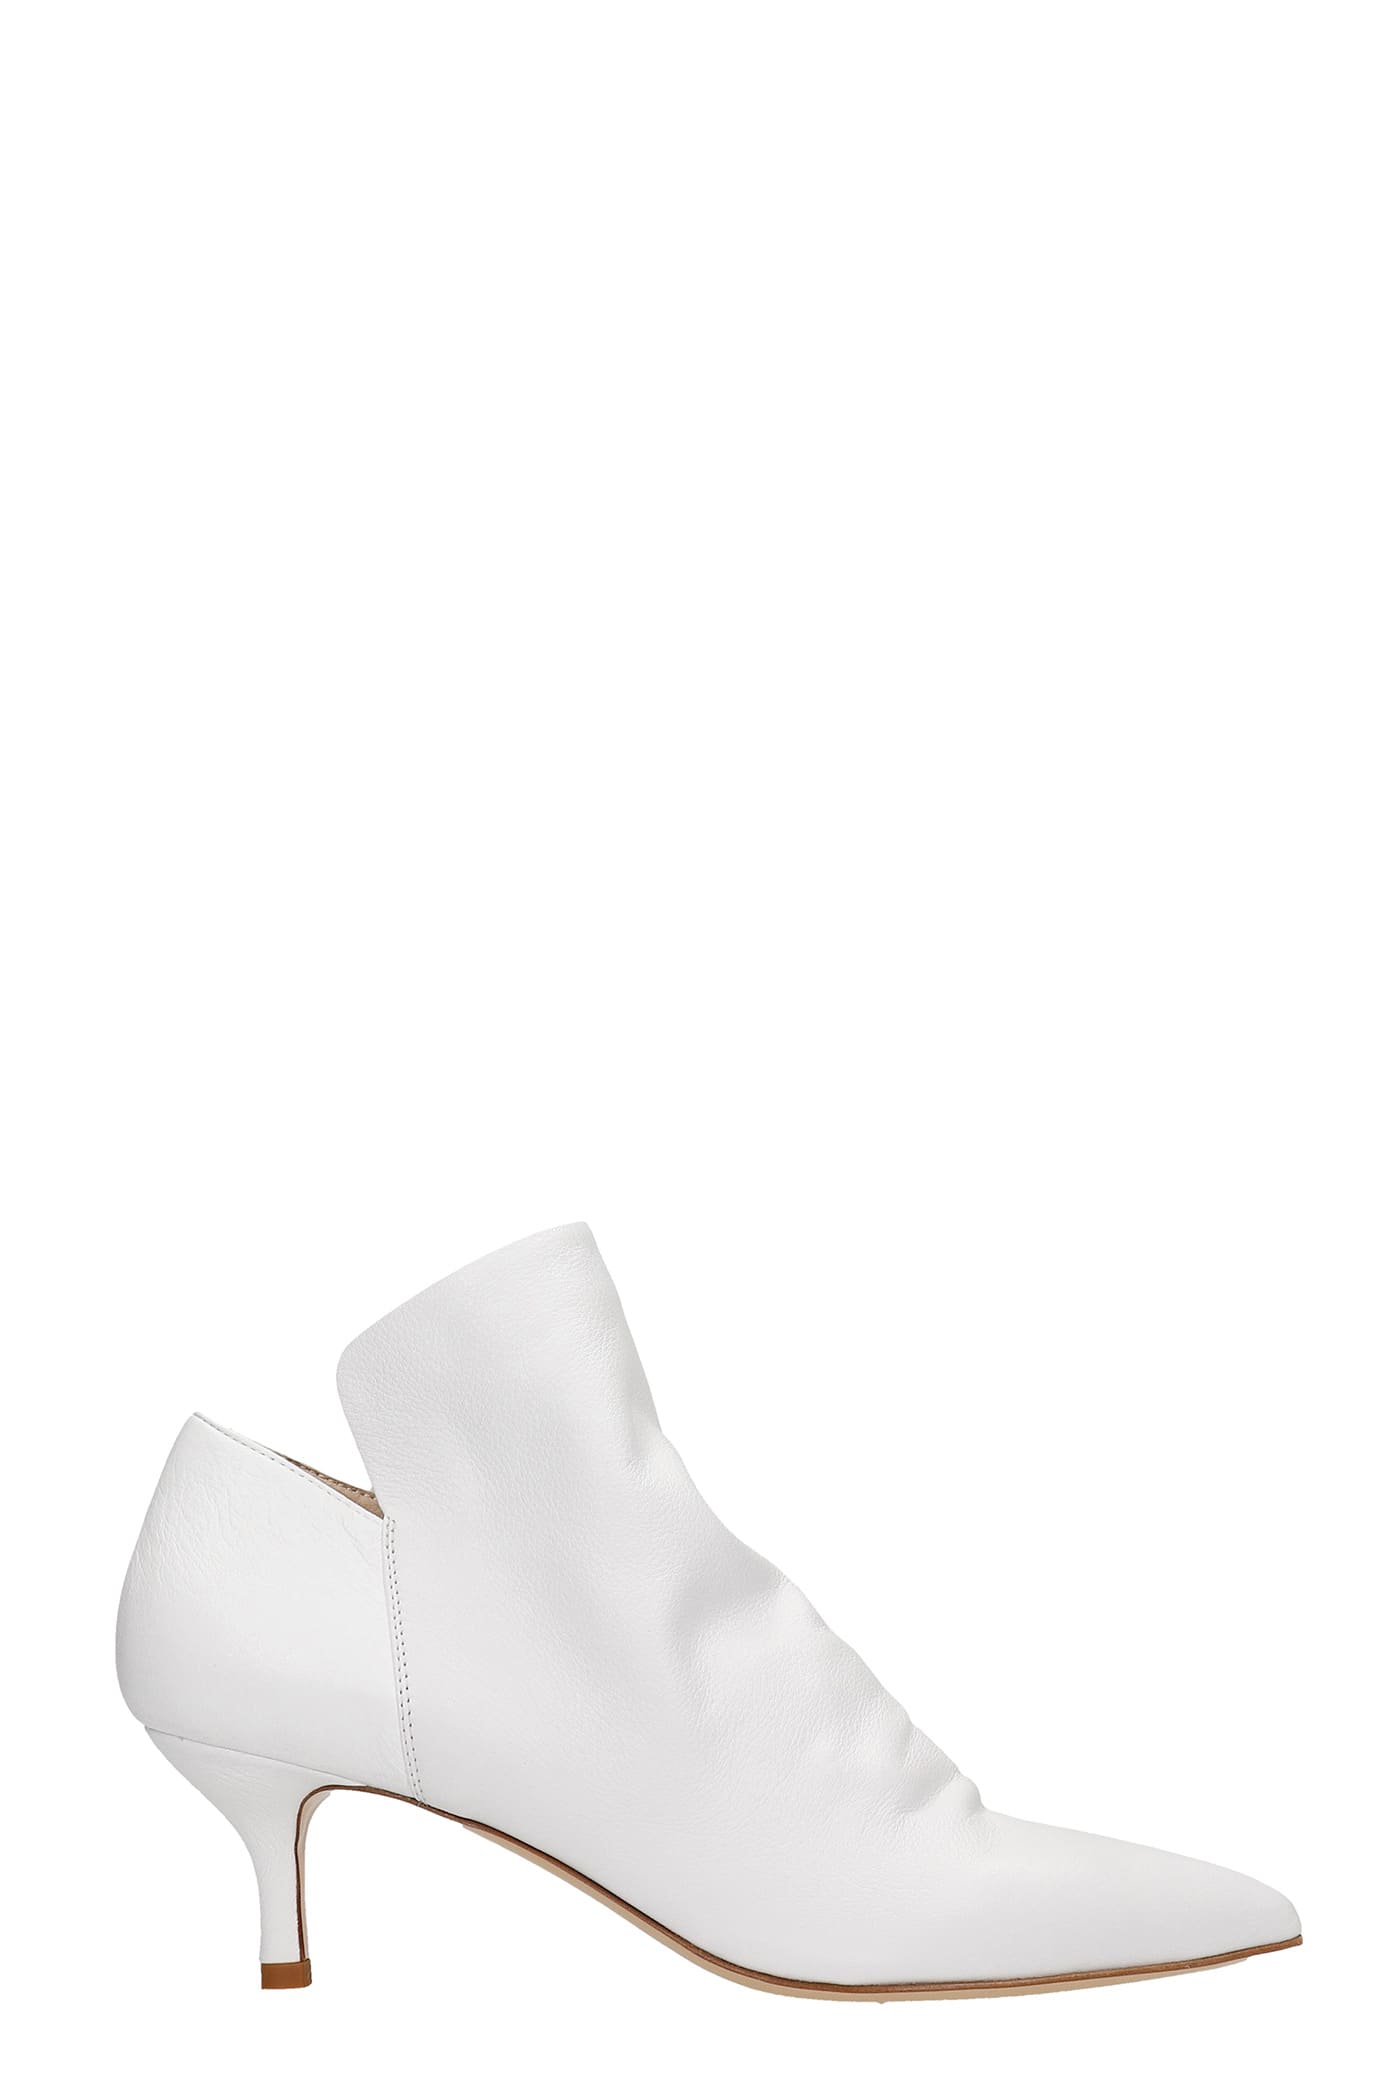 Strategia High Heels Ankle Boots In White Leather